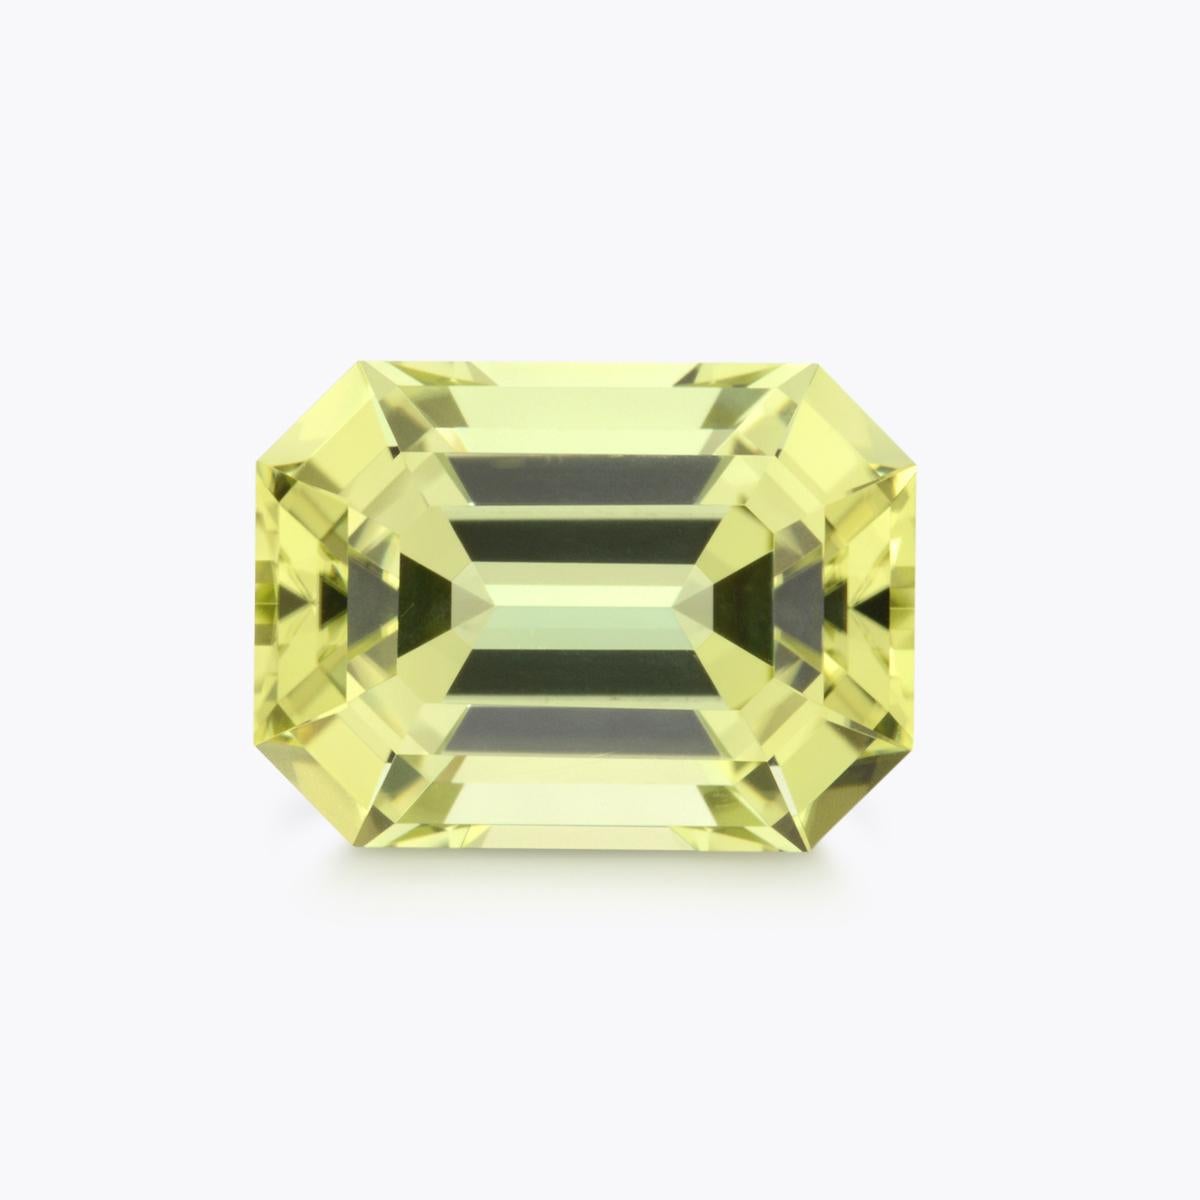 Contemporary Green Tourmaline Ring Loose Gemstone 7.86 Carat Unmounted Emerald Cut For Sale